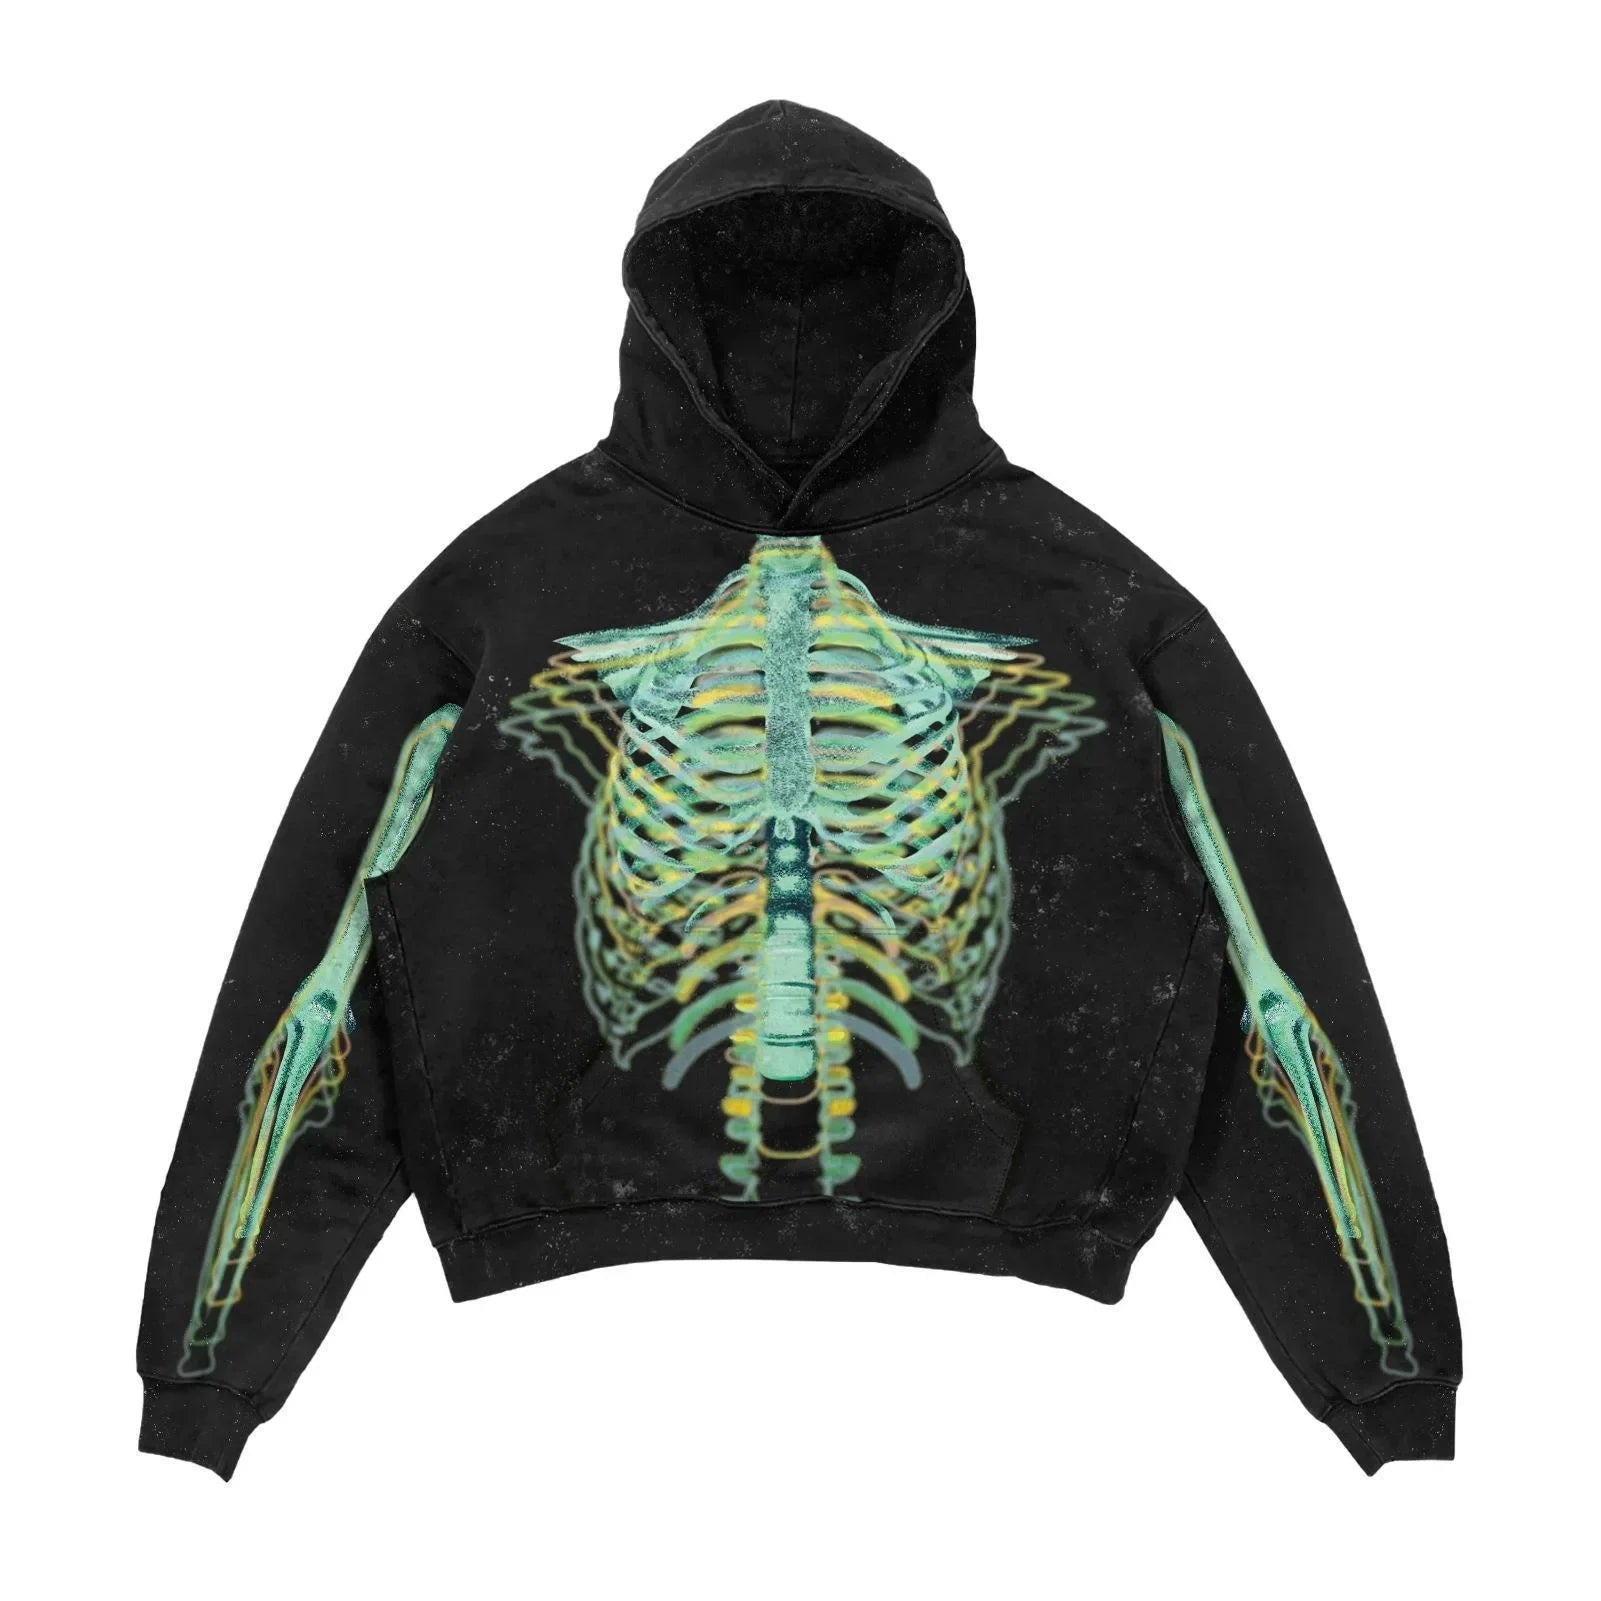 Maramalive™ Explosions Printed Skull Y2K Retro Hooded Sweater Coat Street Style Gothic Casual Fashion Hooded Sweater Men's Female featuring a vibrant, anatomical skeleton ribcage and arm bones design in greenish hues, perfect for those embracing punk style. Ideal for men who want to make a bold statement with their hoodies.